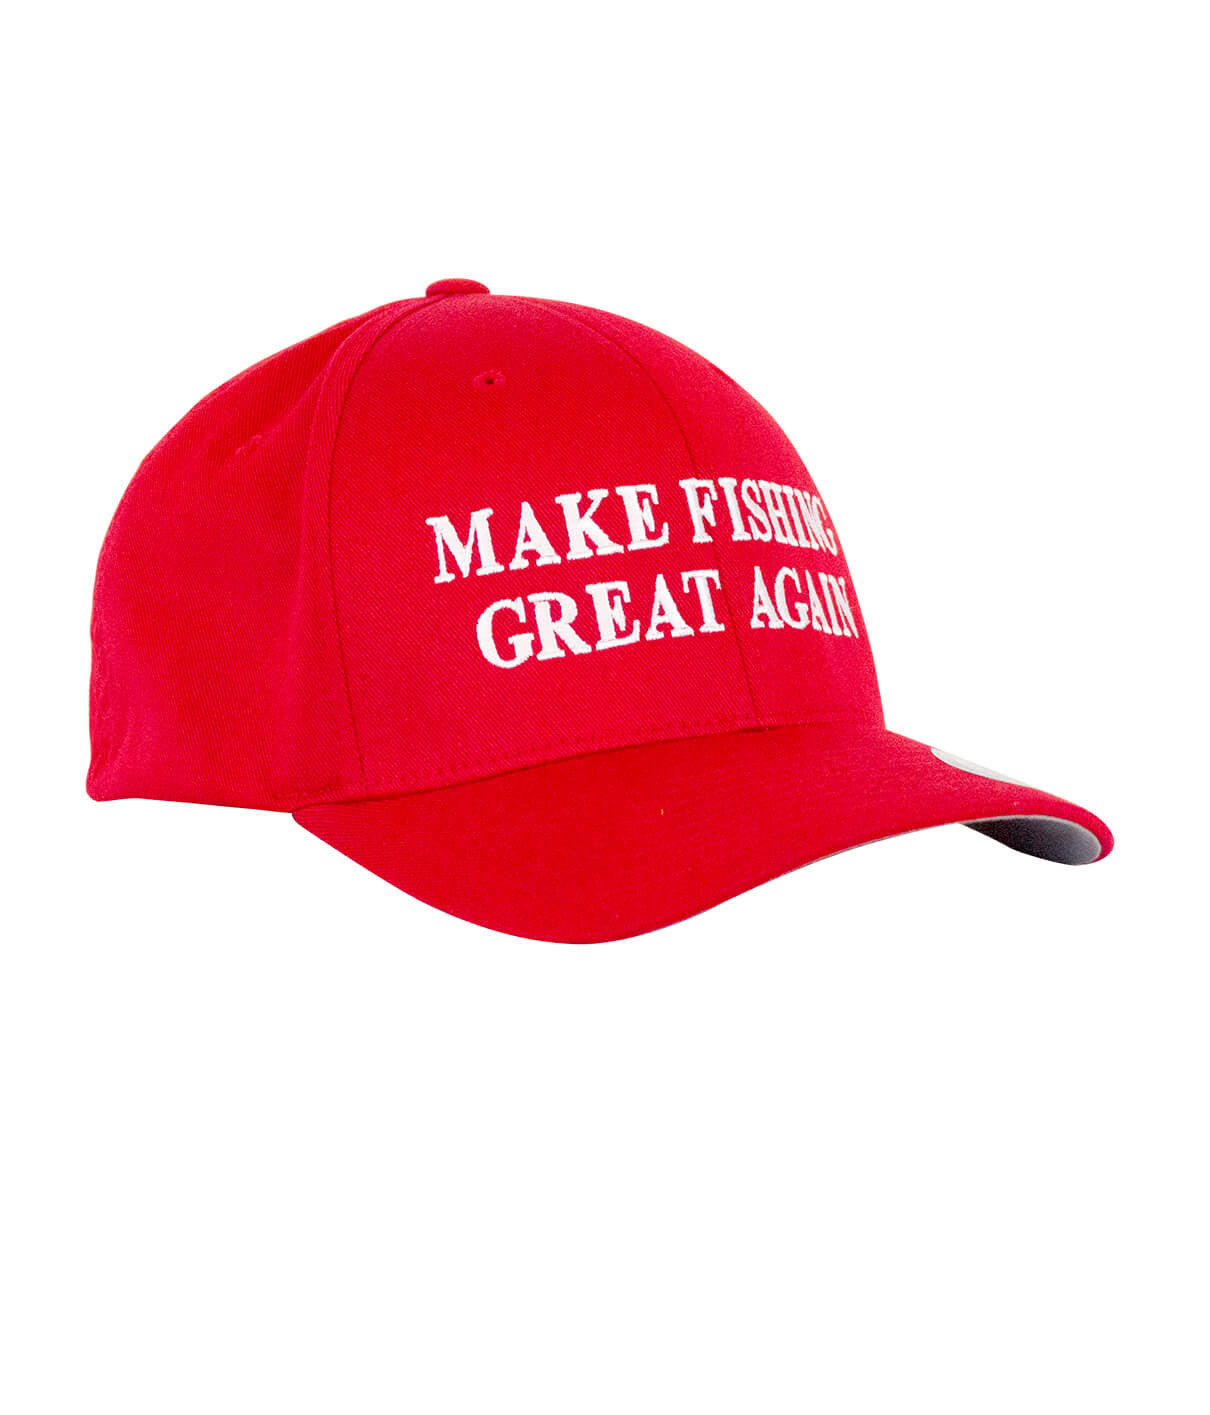 Red Make Fishing Great Again Classic Flexfit Hats | NICERIDE S/M